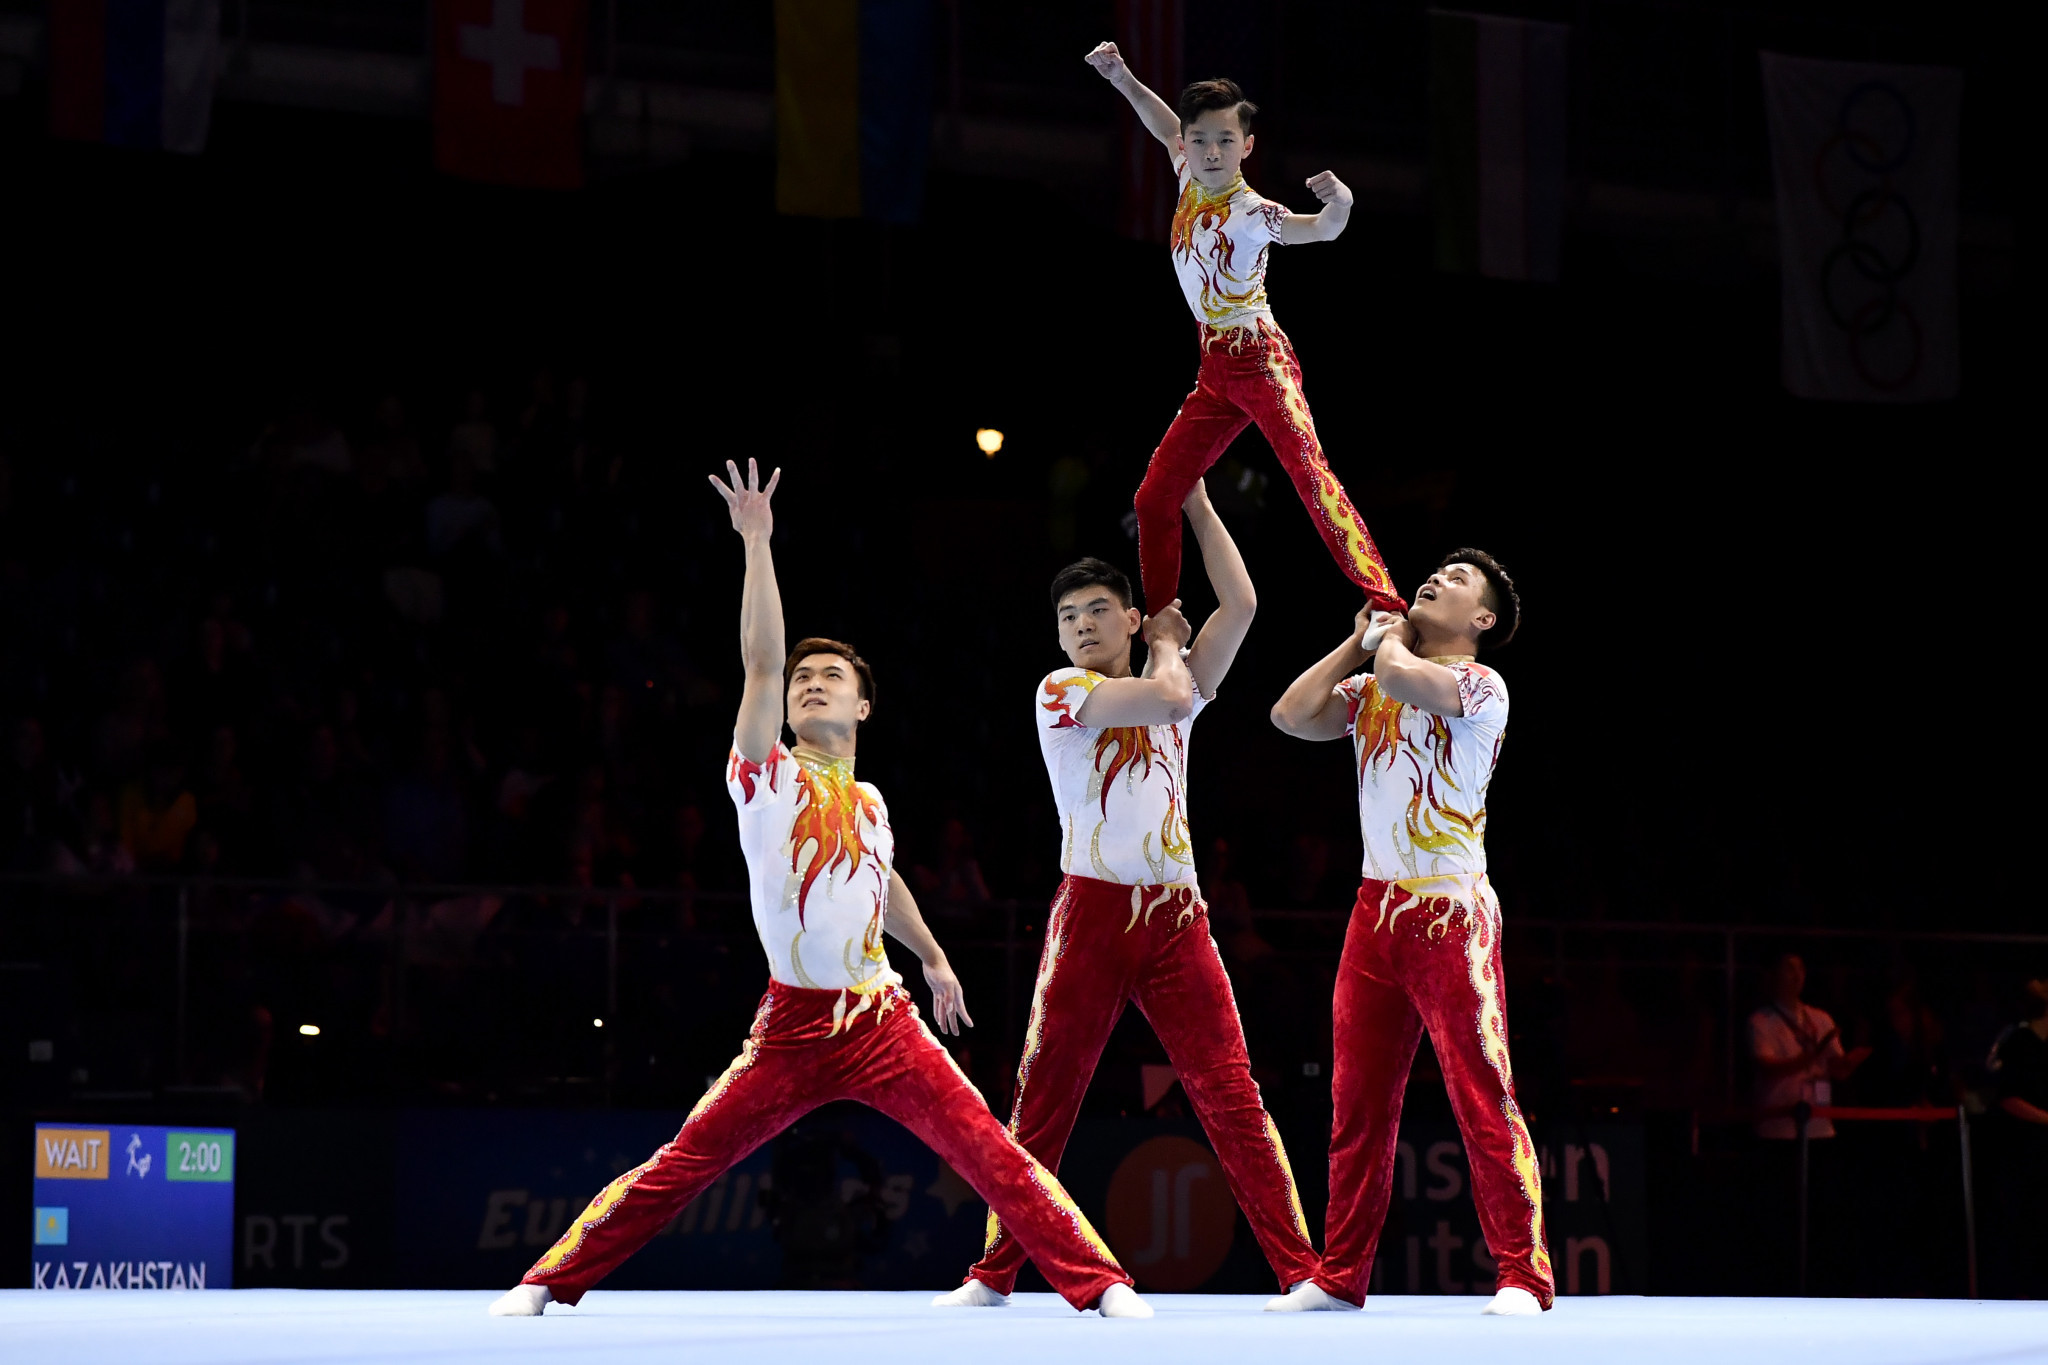 China's Fu Zhi, Guo Pei, Jiang Heng and Zhang Junshuo are expected to be strong contenders in the men's group ©Getty Images